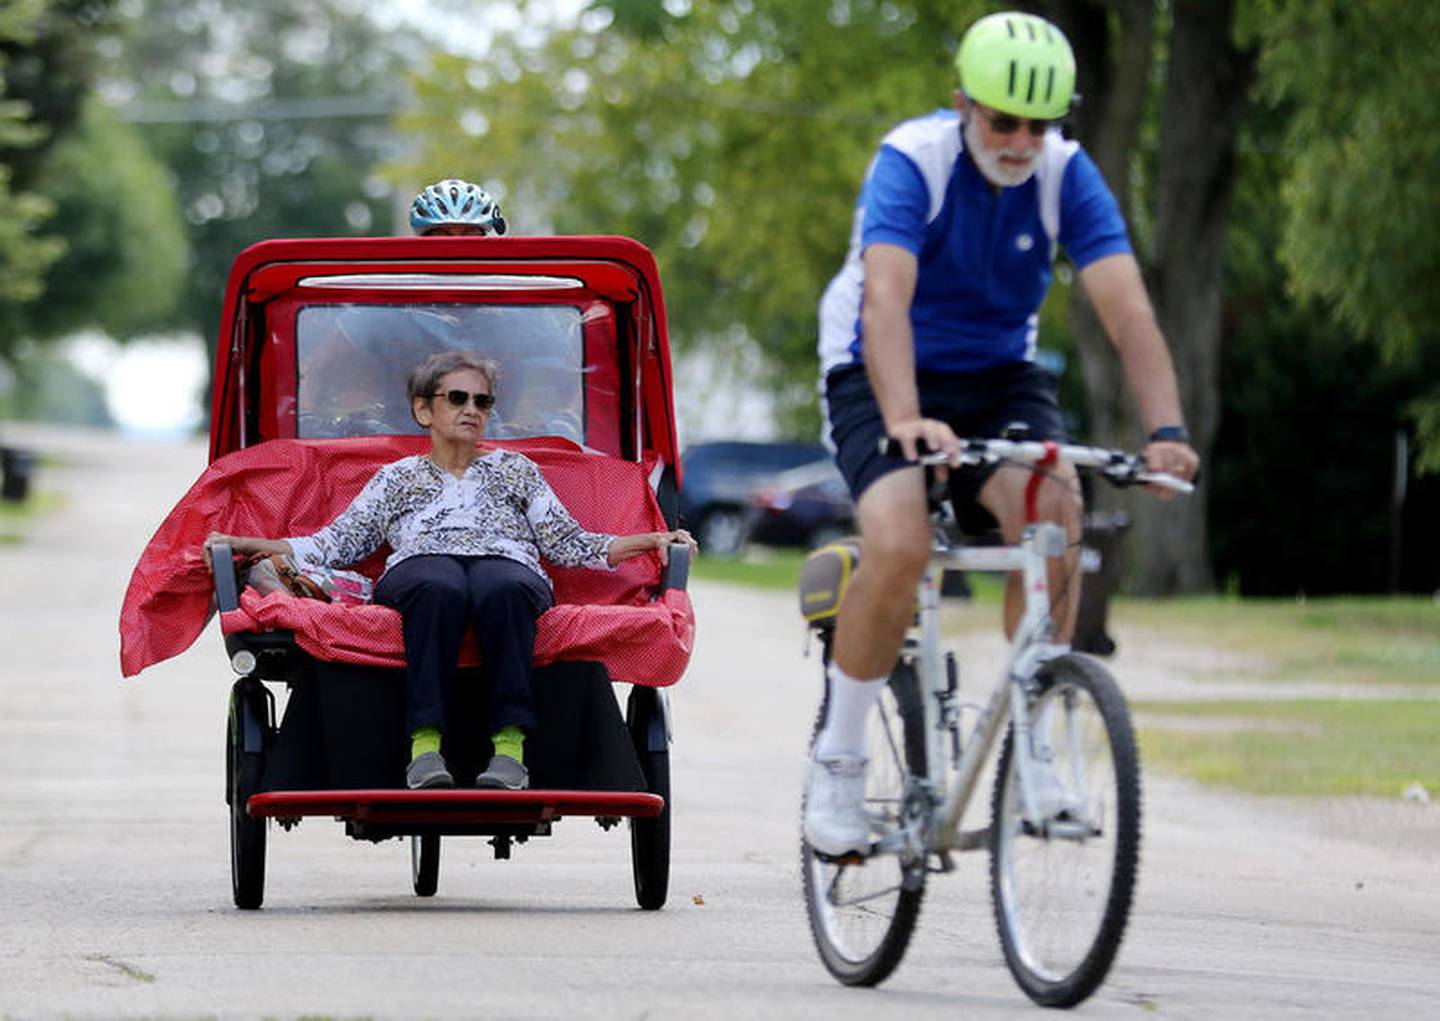 Dolores Roti of Hebron goes on a ride through town on a Trishaw operated by Cycling Without Age member Peg Bolm of McHenry, with Jim Bolm leading the route on Tuesday, Aug. 18, 2020 in Hebron.  The organization plans on offering more rides to seniors in McHenry County to give them a sense of joy and experience the outdoors in a new way.